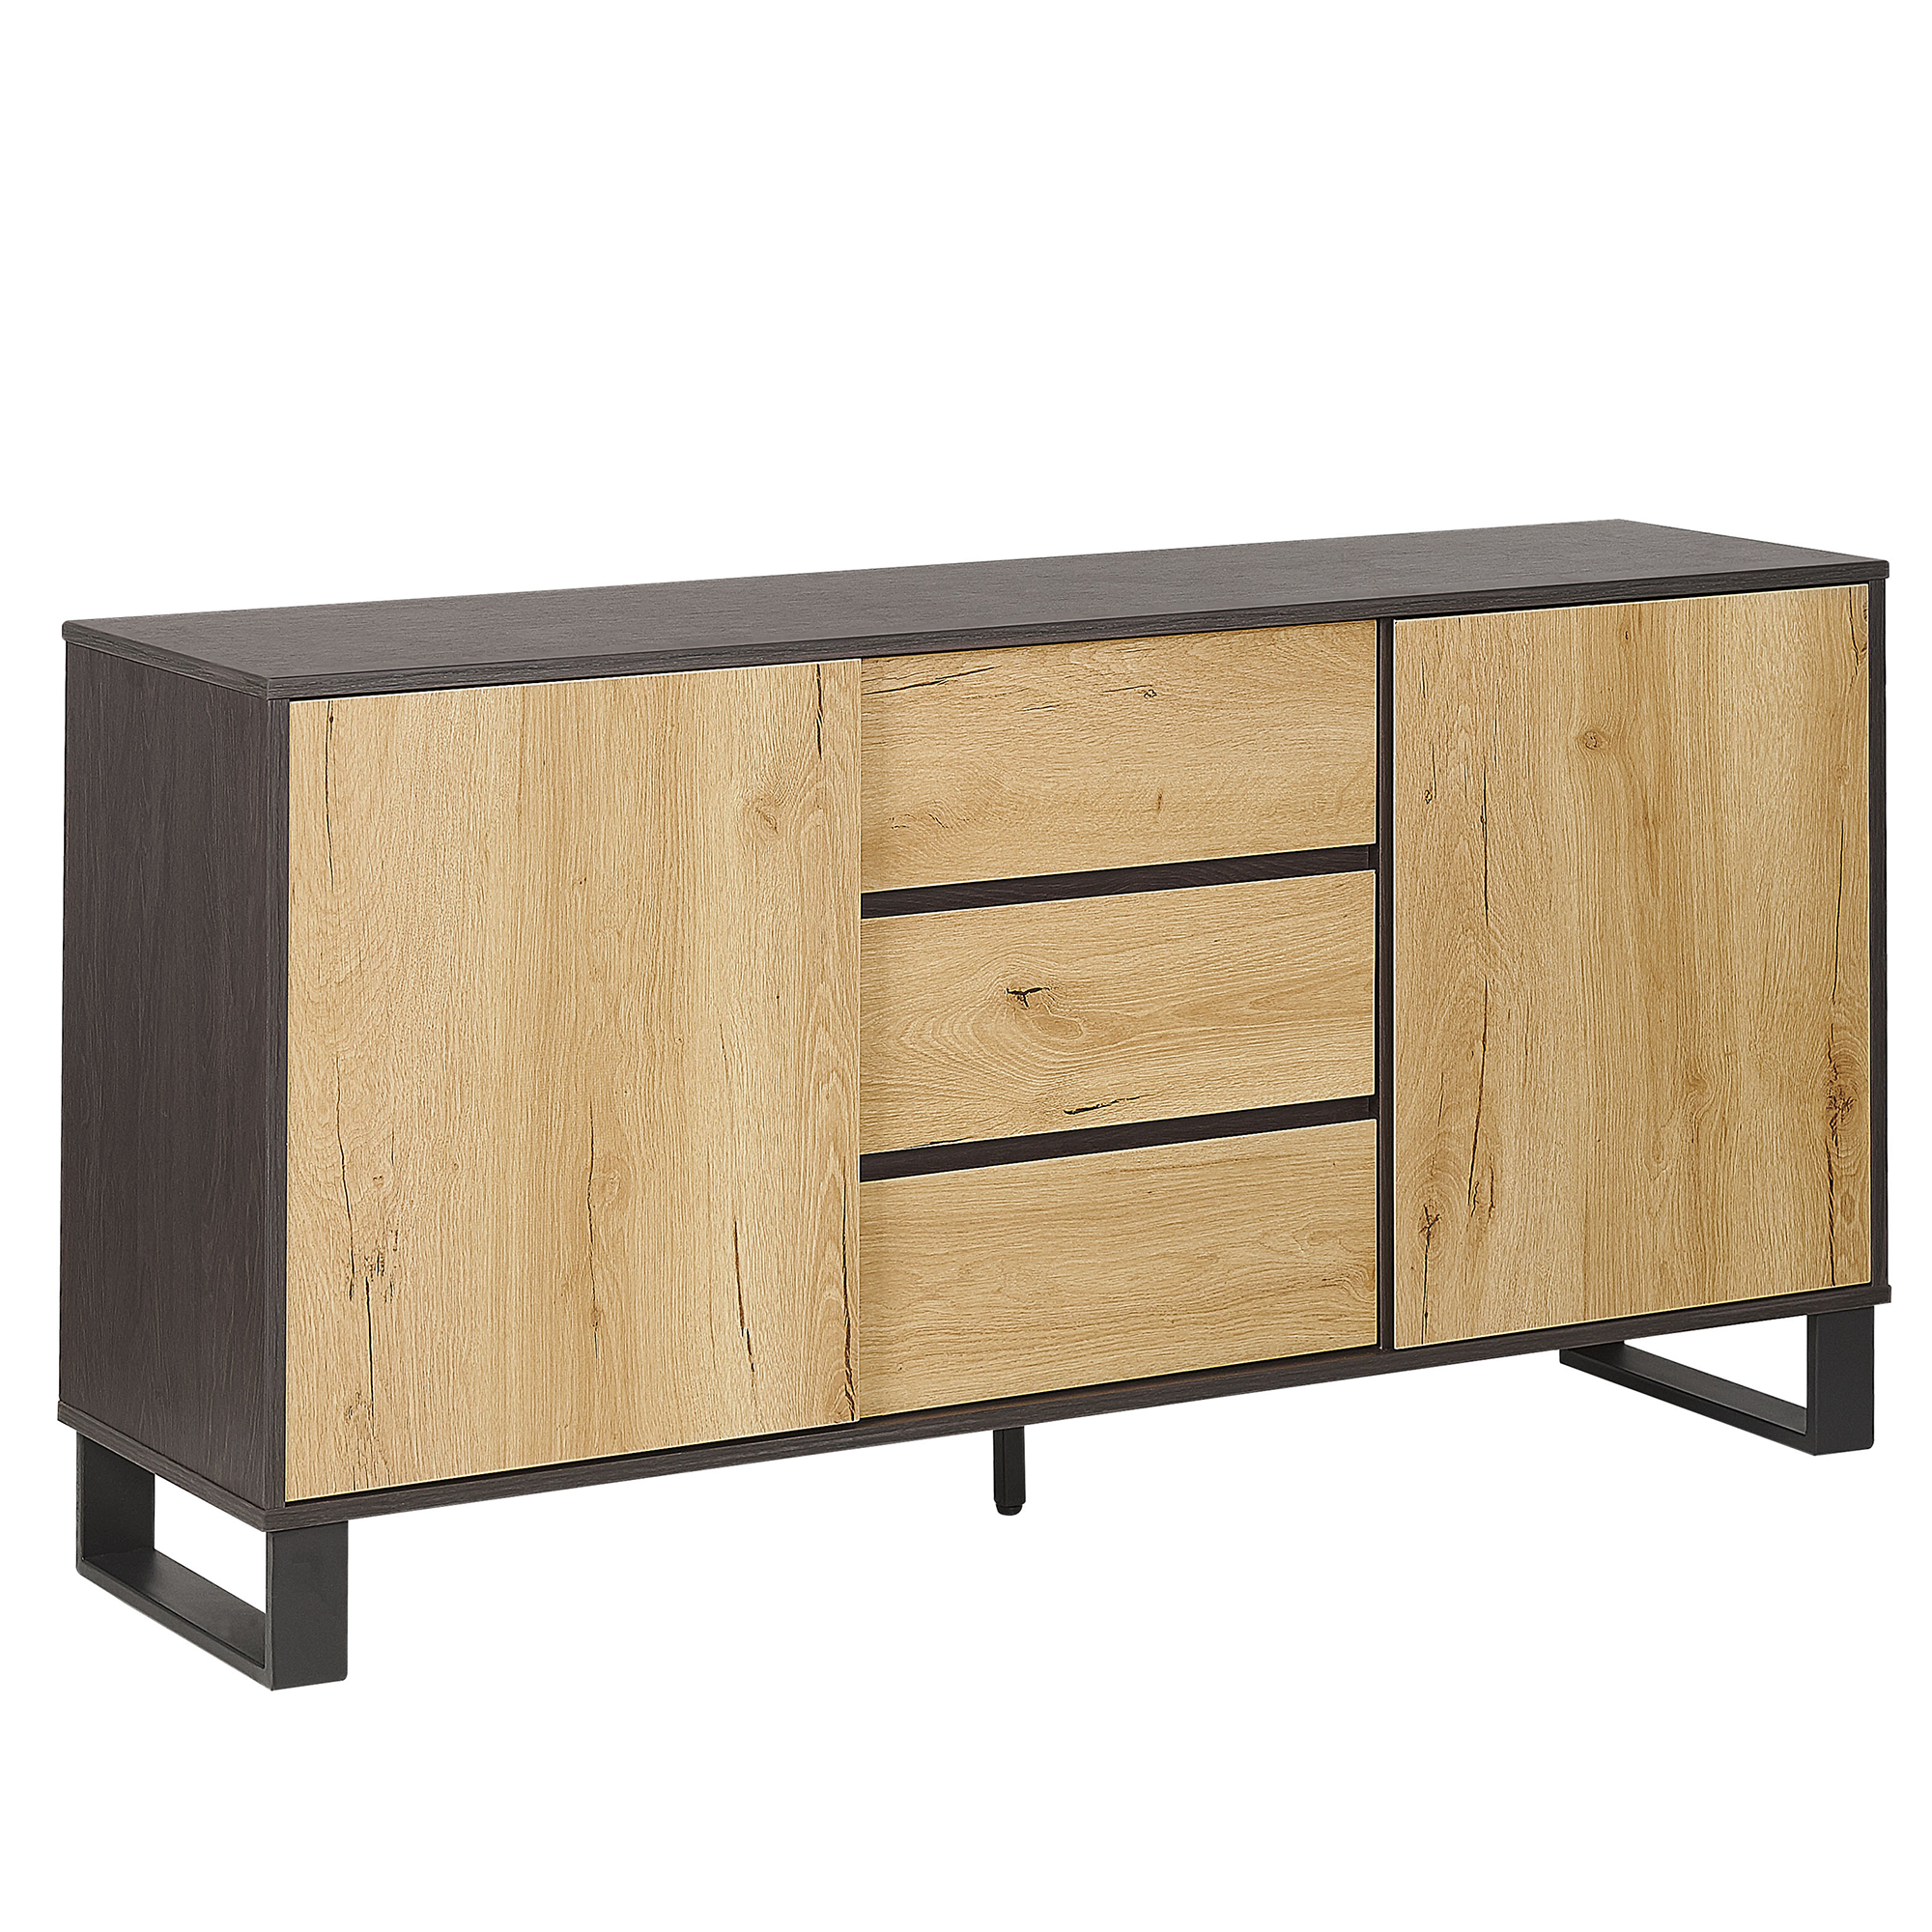 Beliani Sideboard Light Wood with Black Chest of Drawers Cabinet Storage Unit Bedroom Living Room